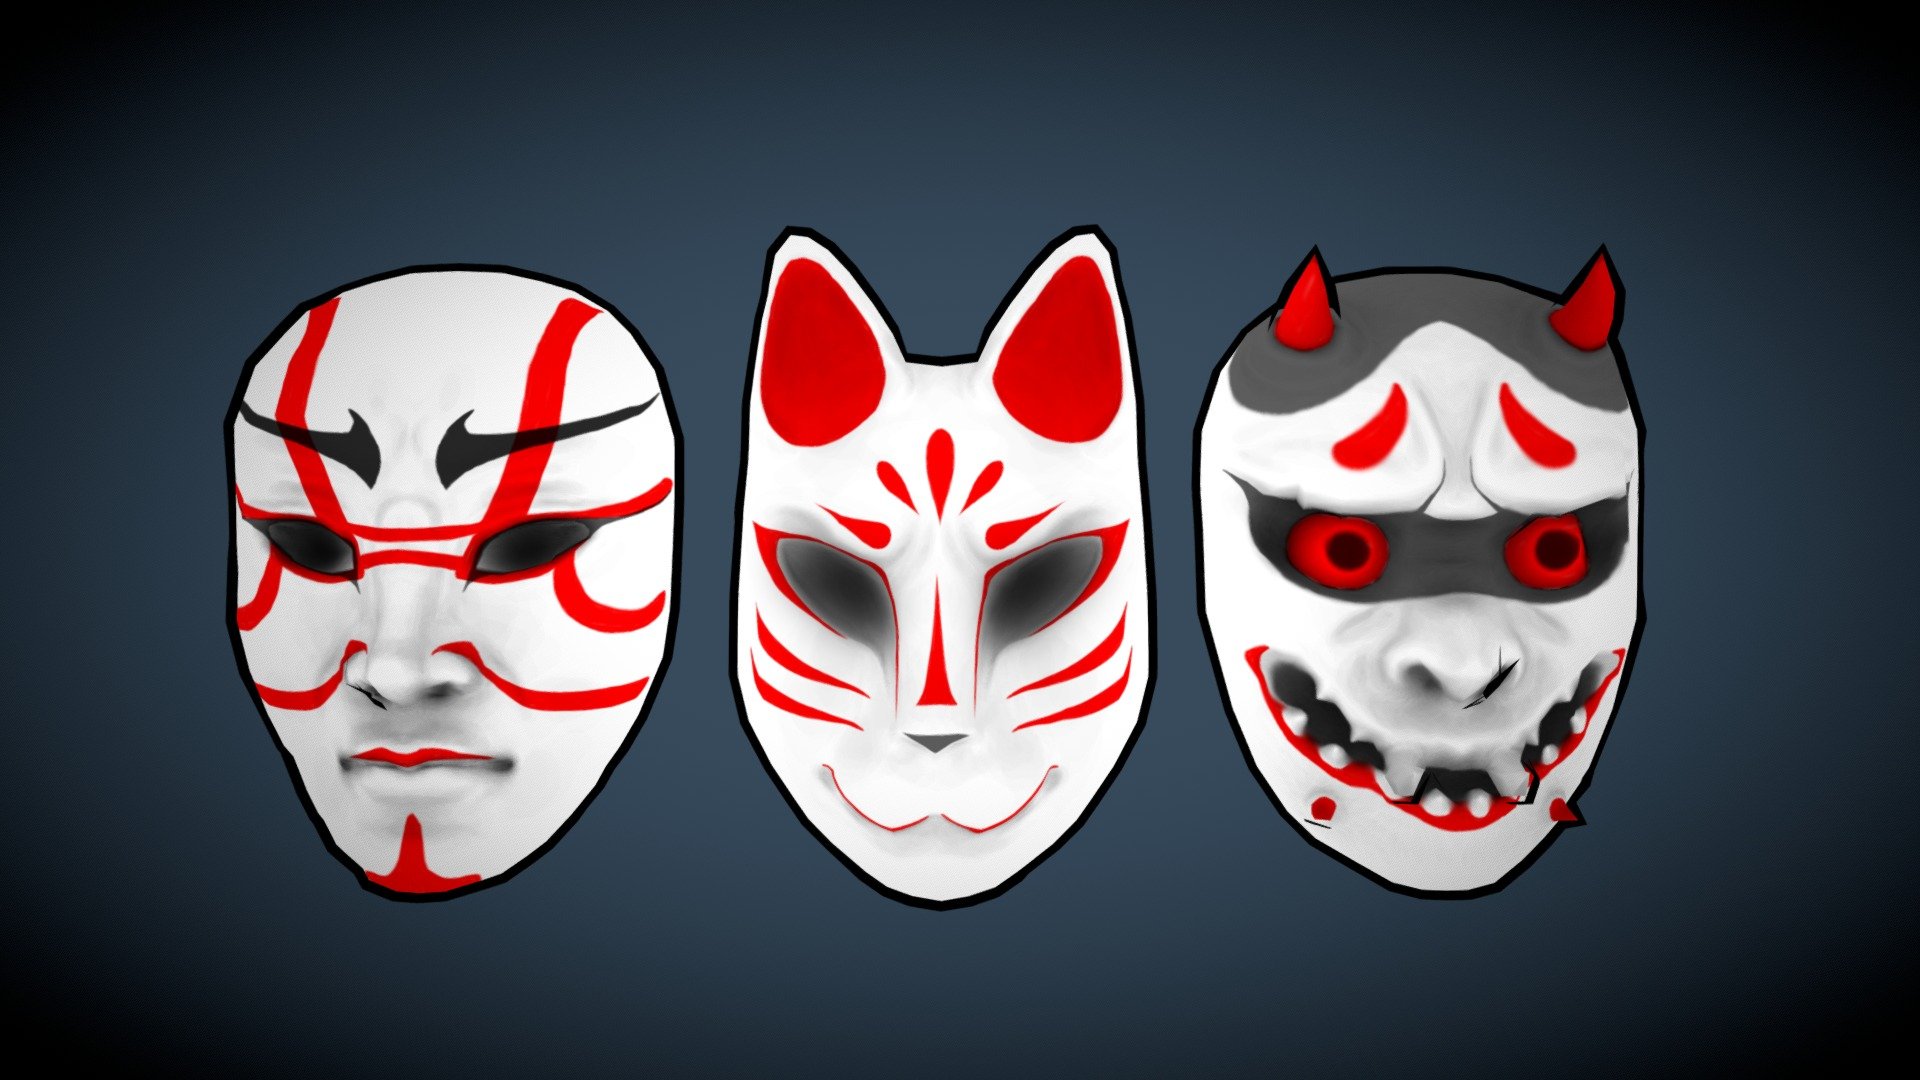 For a small game jam I did some Japanese mask, This is my collection.

-Kabuki
-Kitsune
-Oni - Japanese Mask Collection - 3D model by Jessykat 3d model